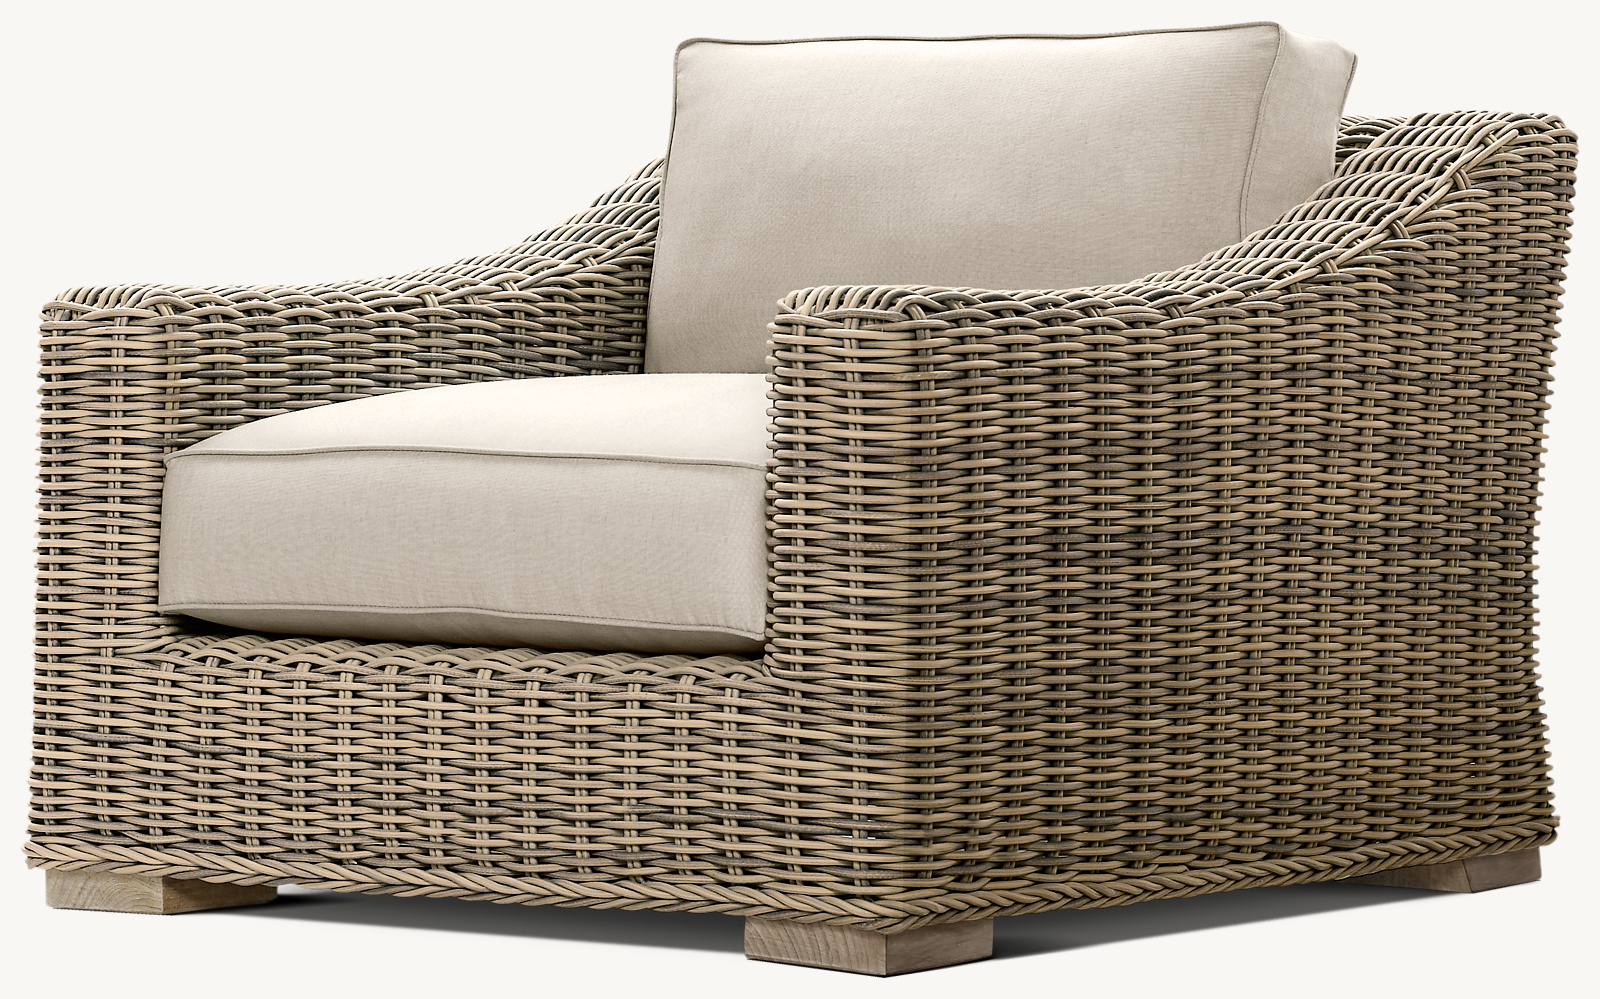 Shown in Grey. Cushions (sold separately) shown in Sand Perennials&#174; Performance Textured Linen Weave.